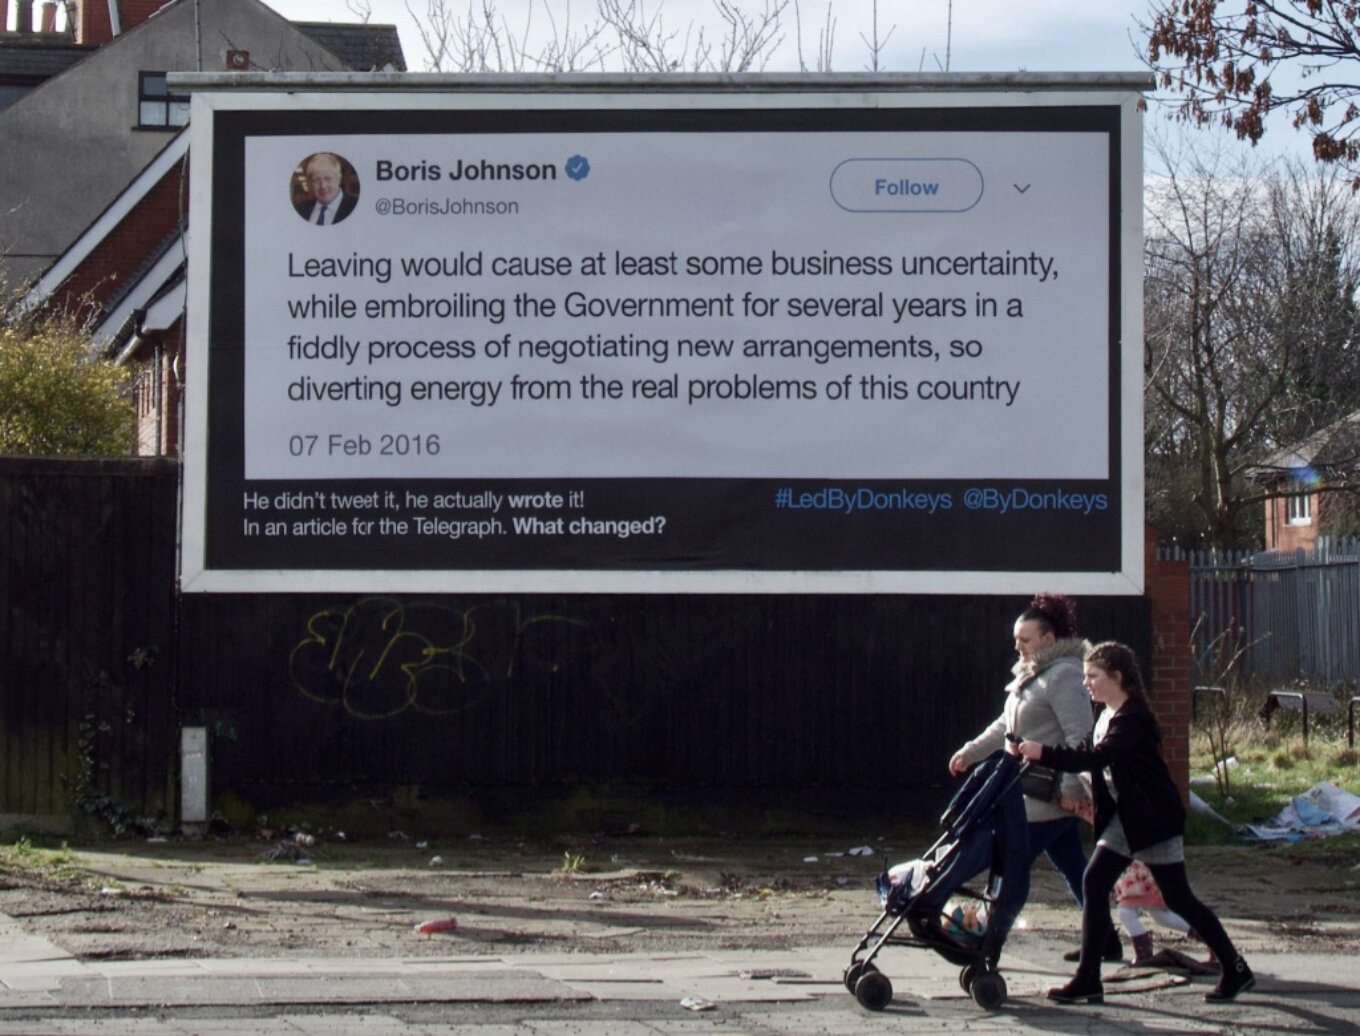 A Led by Donkeys billboard quoting Boris Johnson saying leaving the EU will cause uncertainty